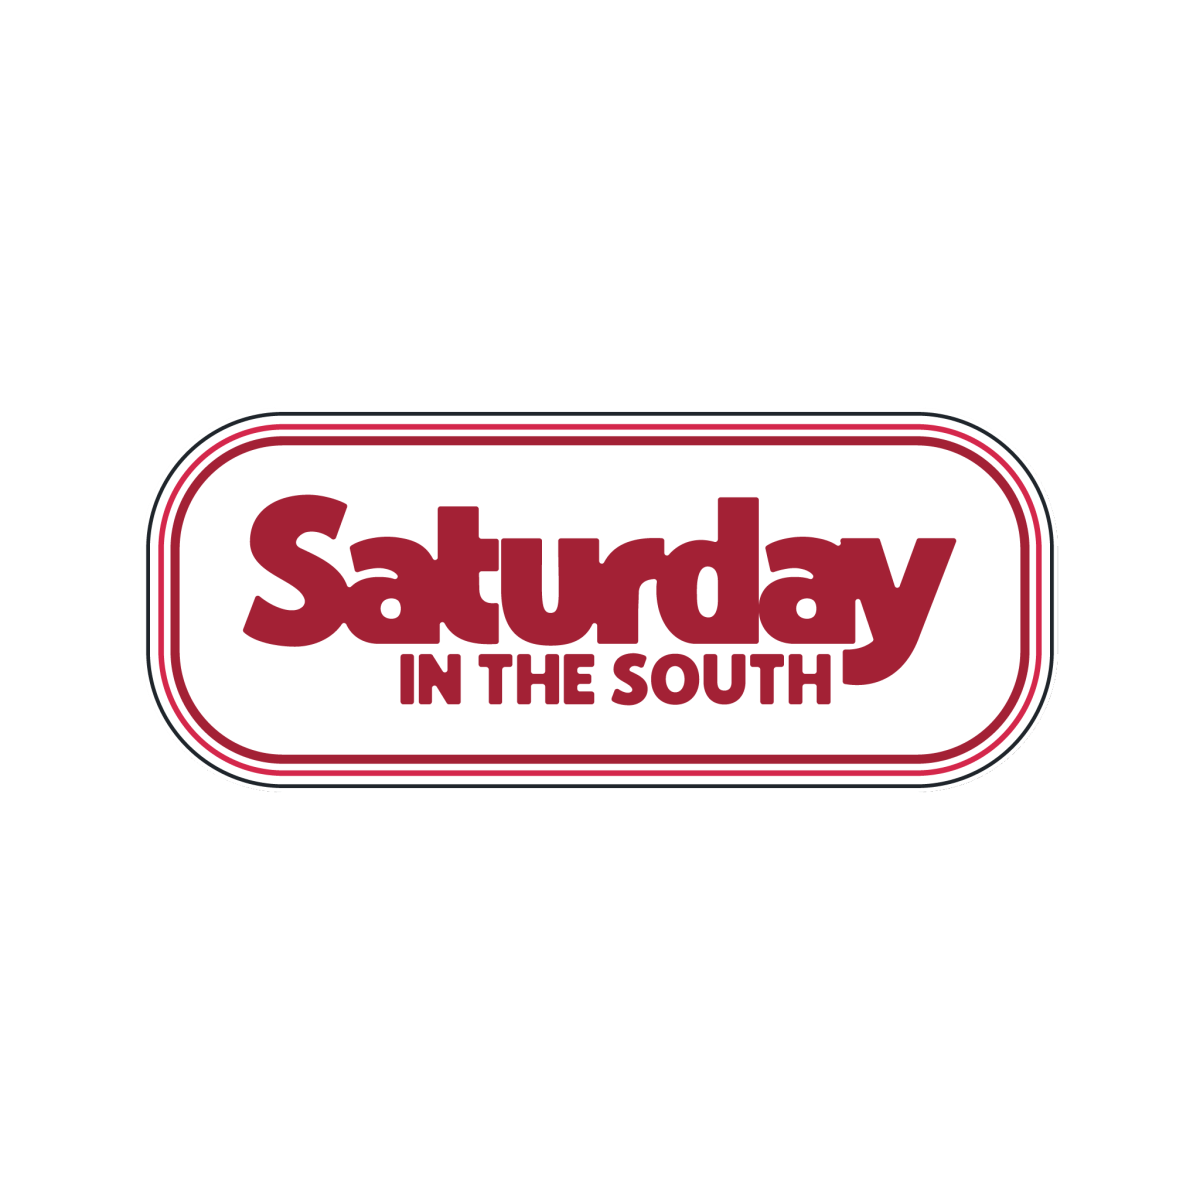 Arkansas Saturday in the South Sticker - Shop B-Unlimited